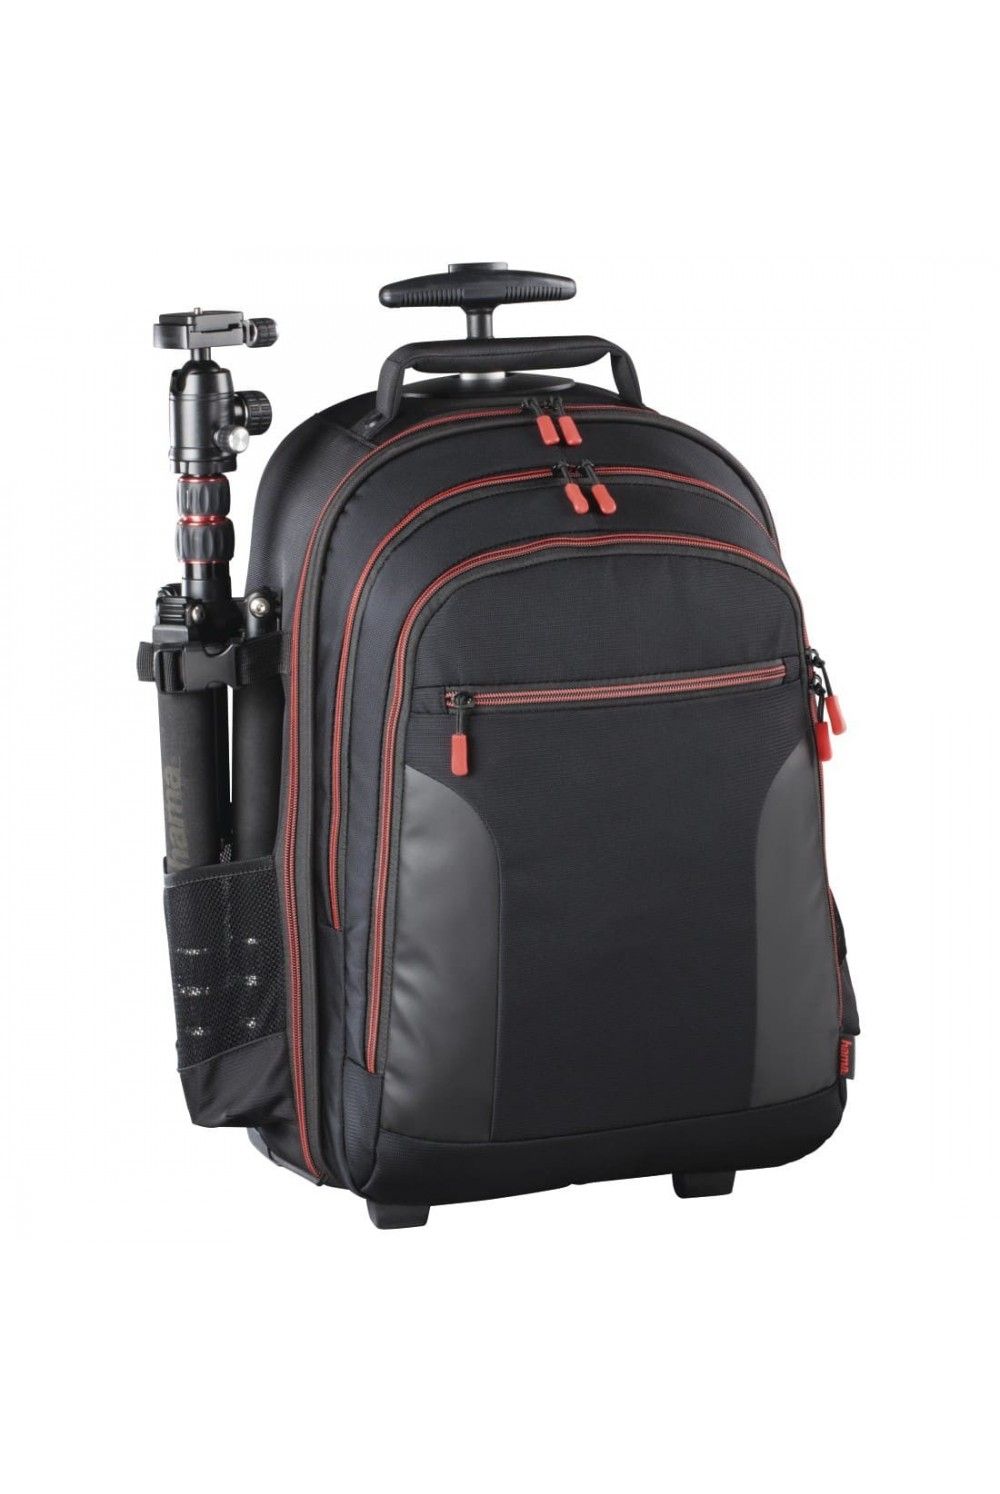 Camera backpack with wheels 15.6 inches Hama